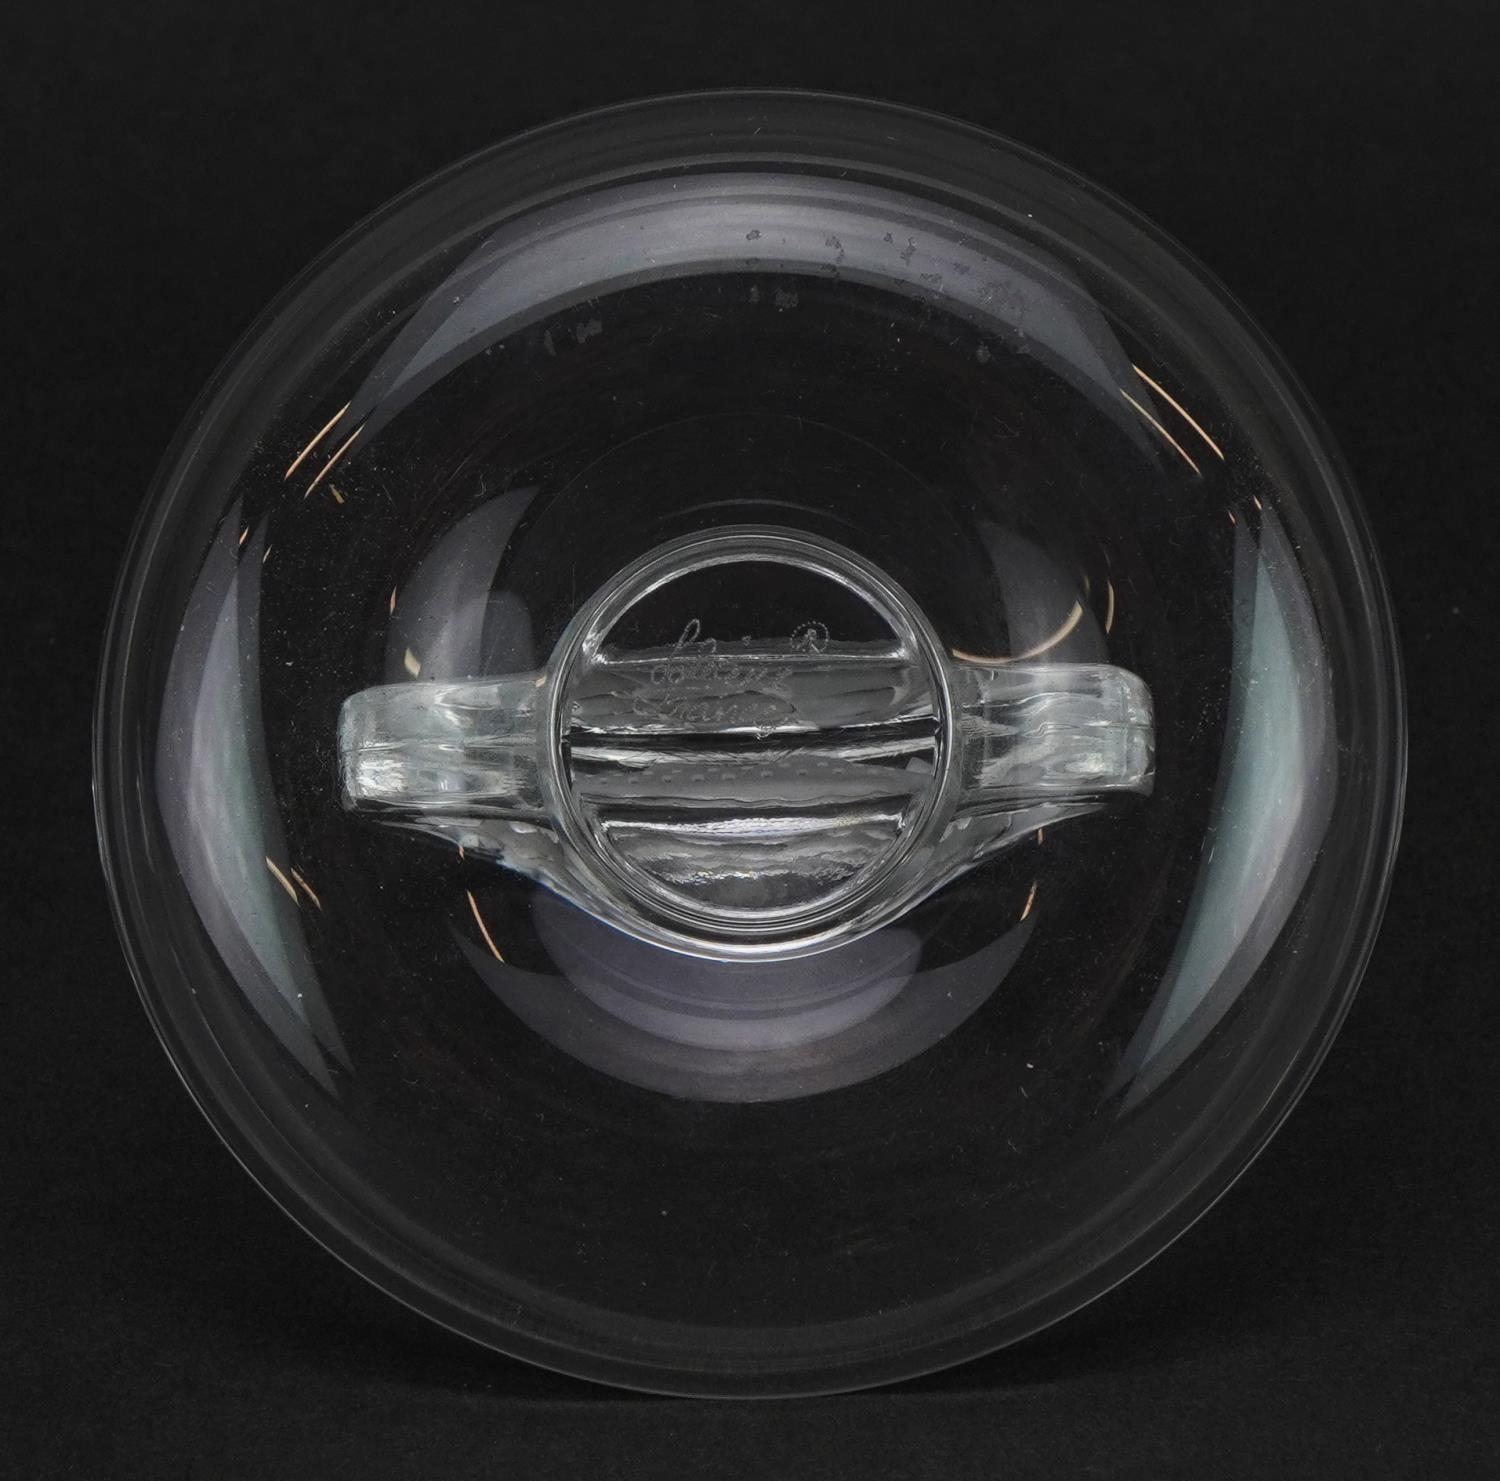 Lalique frosted glass clipper ship ring tray etched with Lalique France to the base, 10cm in - Image 3 of 4